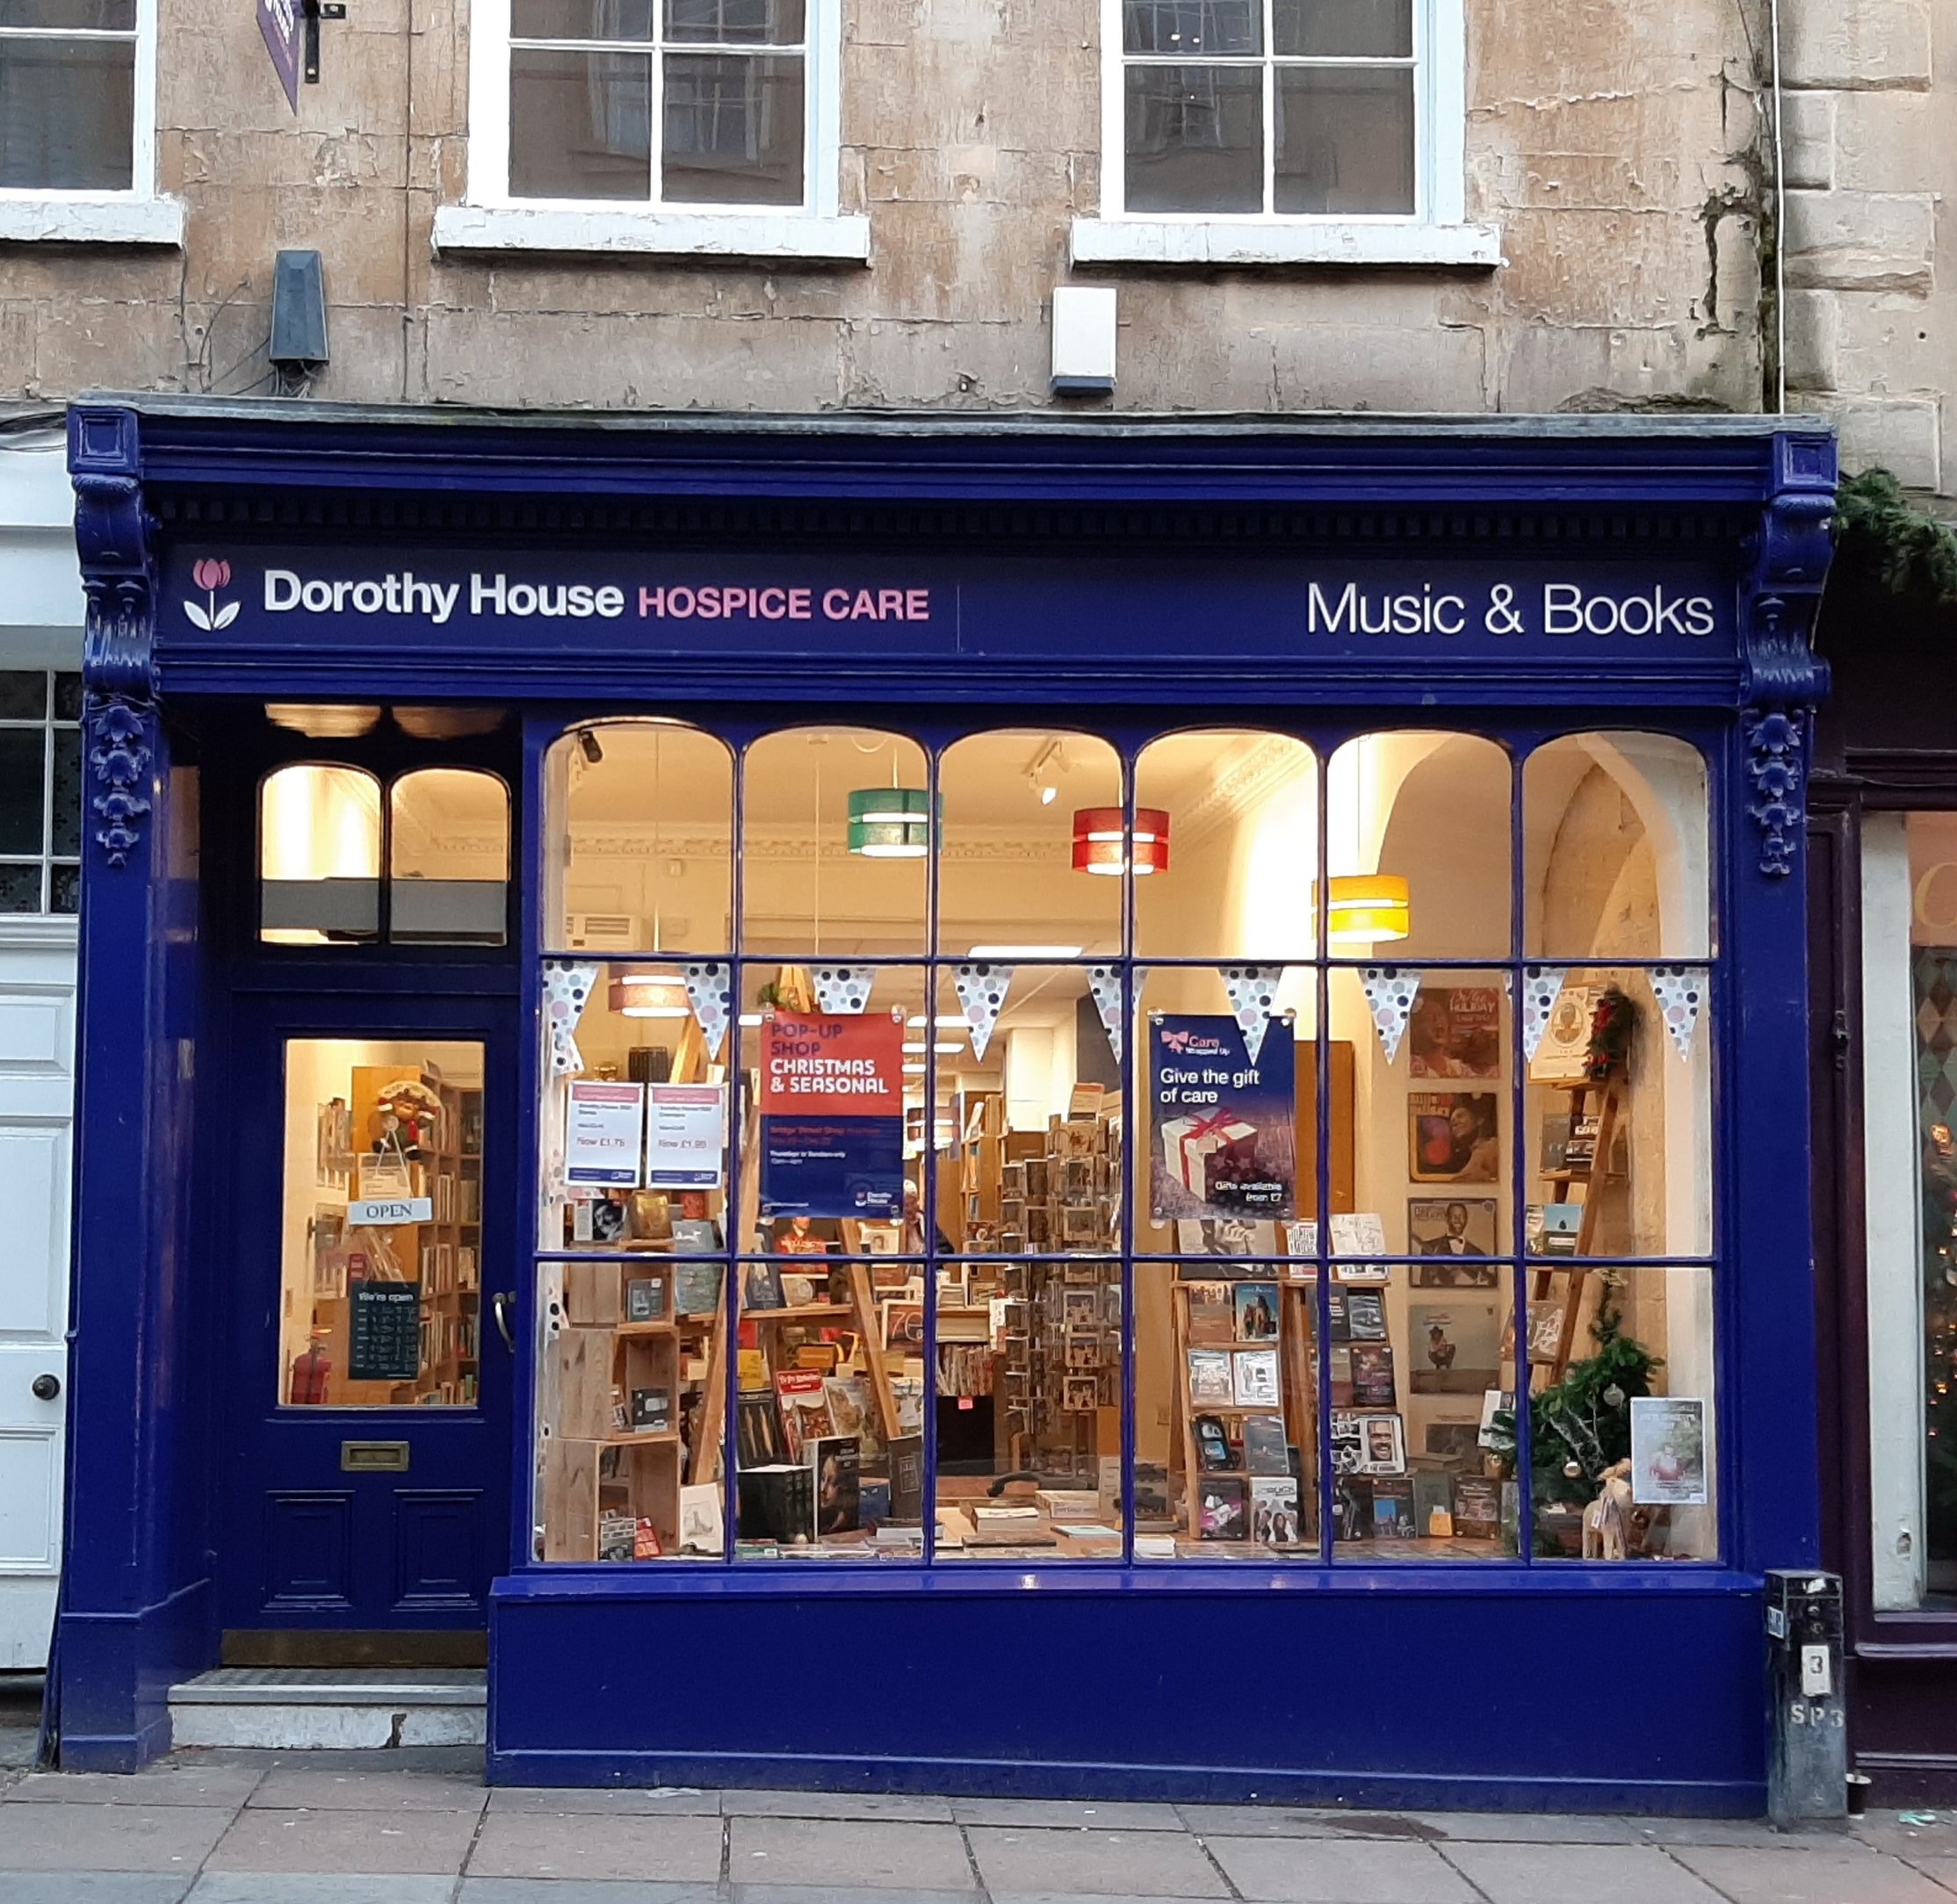 The outside of the shop says 'Dorothy House Hospice Care Music and Books'. There is bunting hanging in the window and lots of books inside